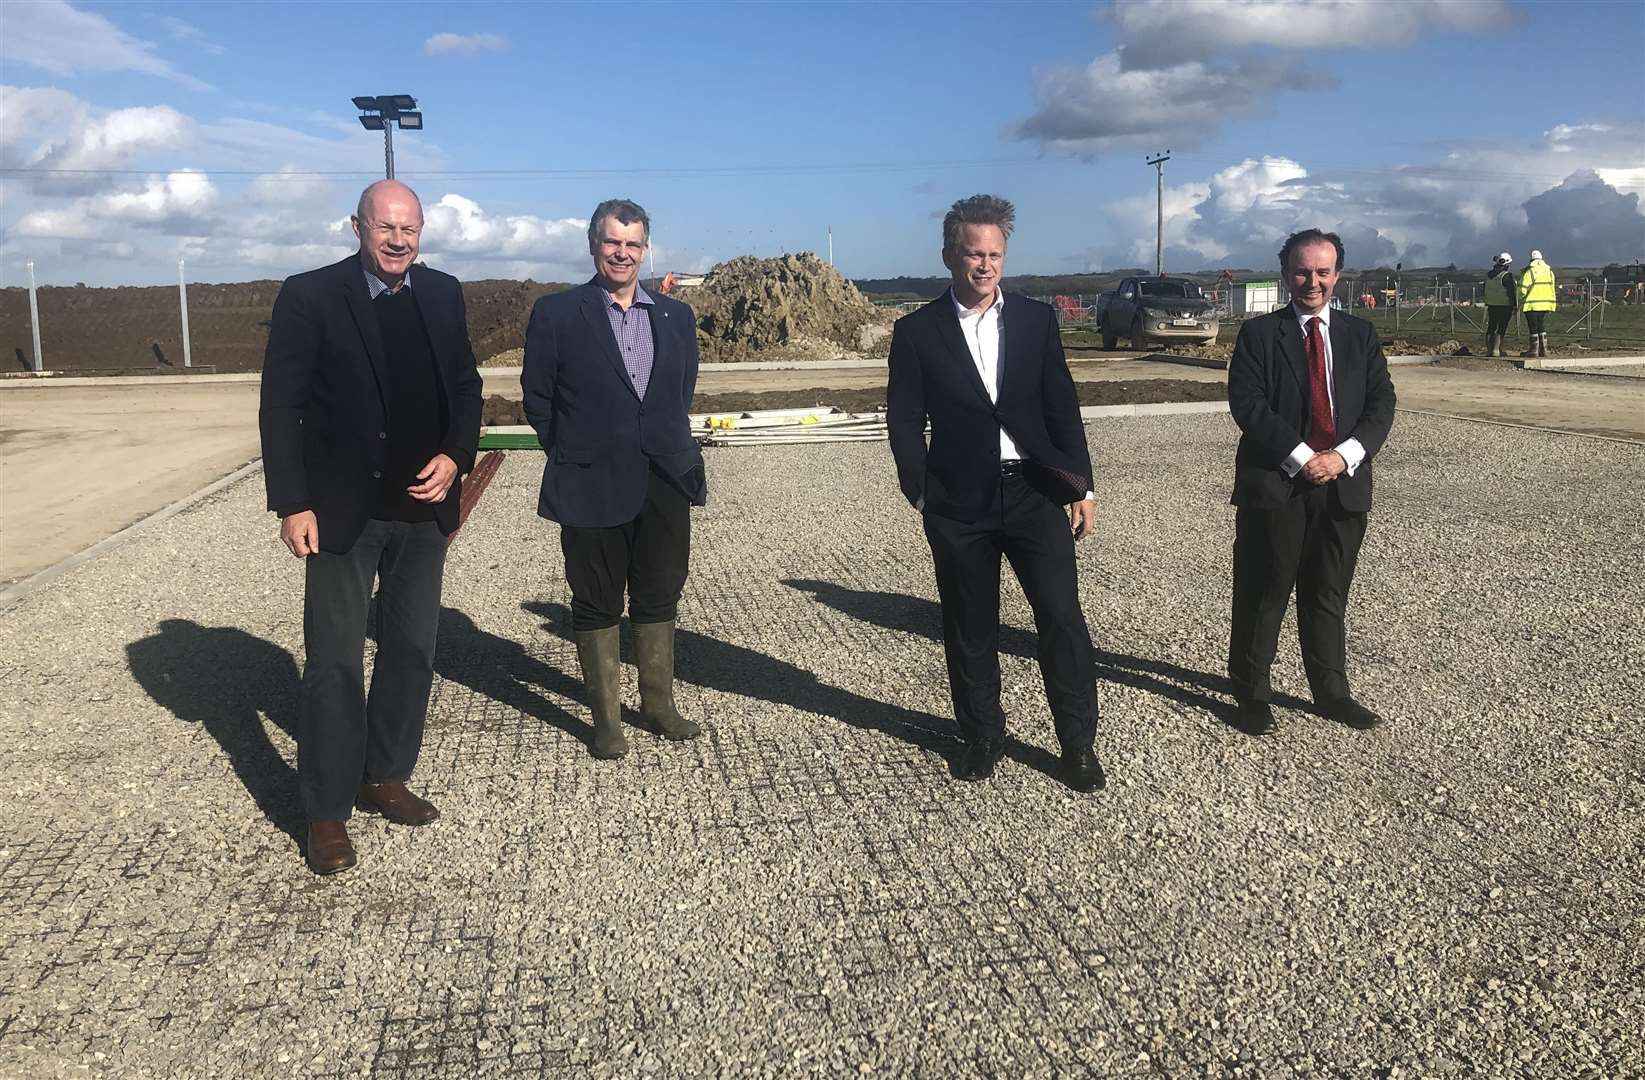 From left to right: MP Damian Green, ABC deputy leader Paul Bartlett, cabinet minister Grant Shapps and KCC leader Roger Gough on a visit to the site last month